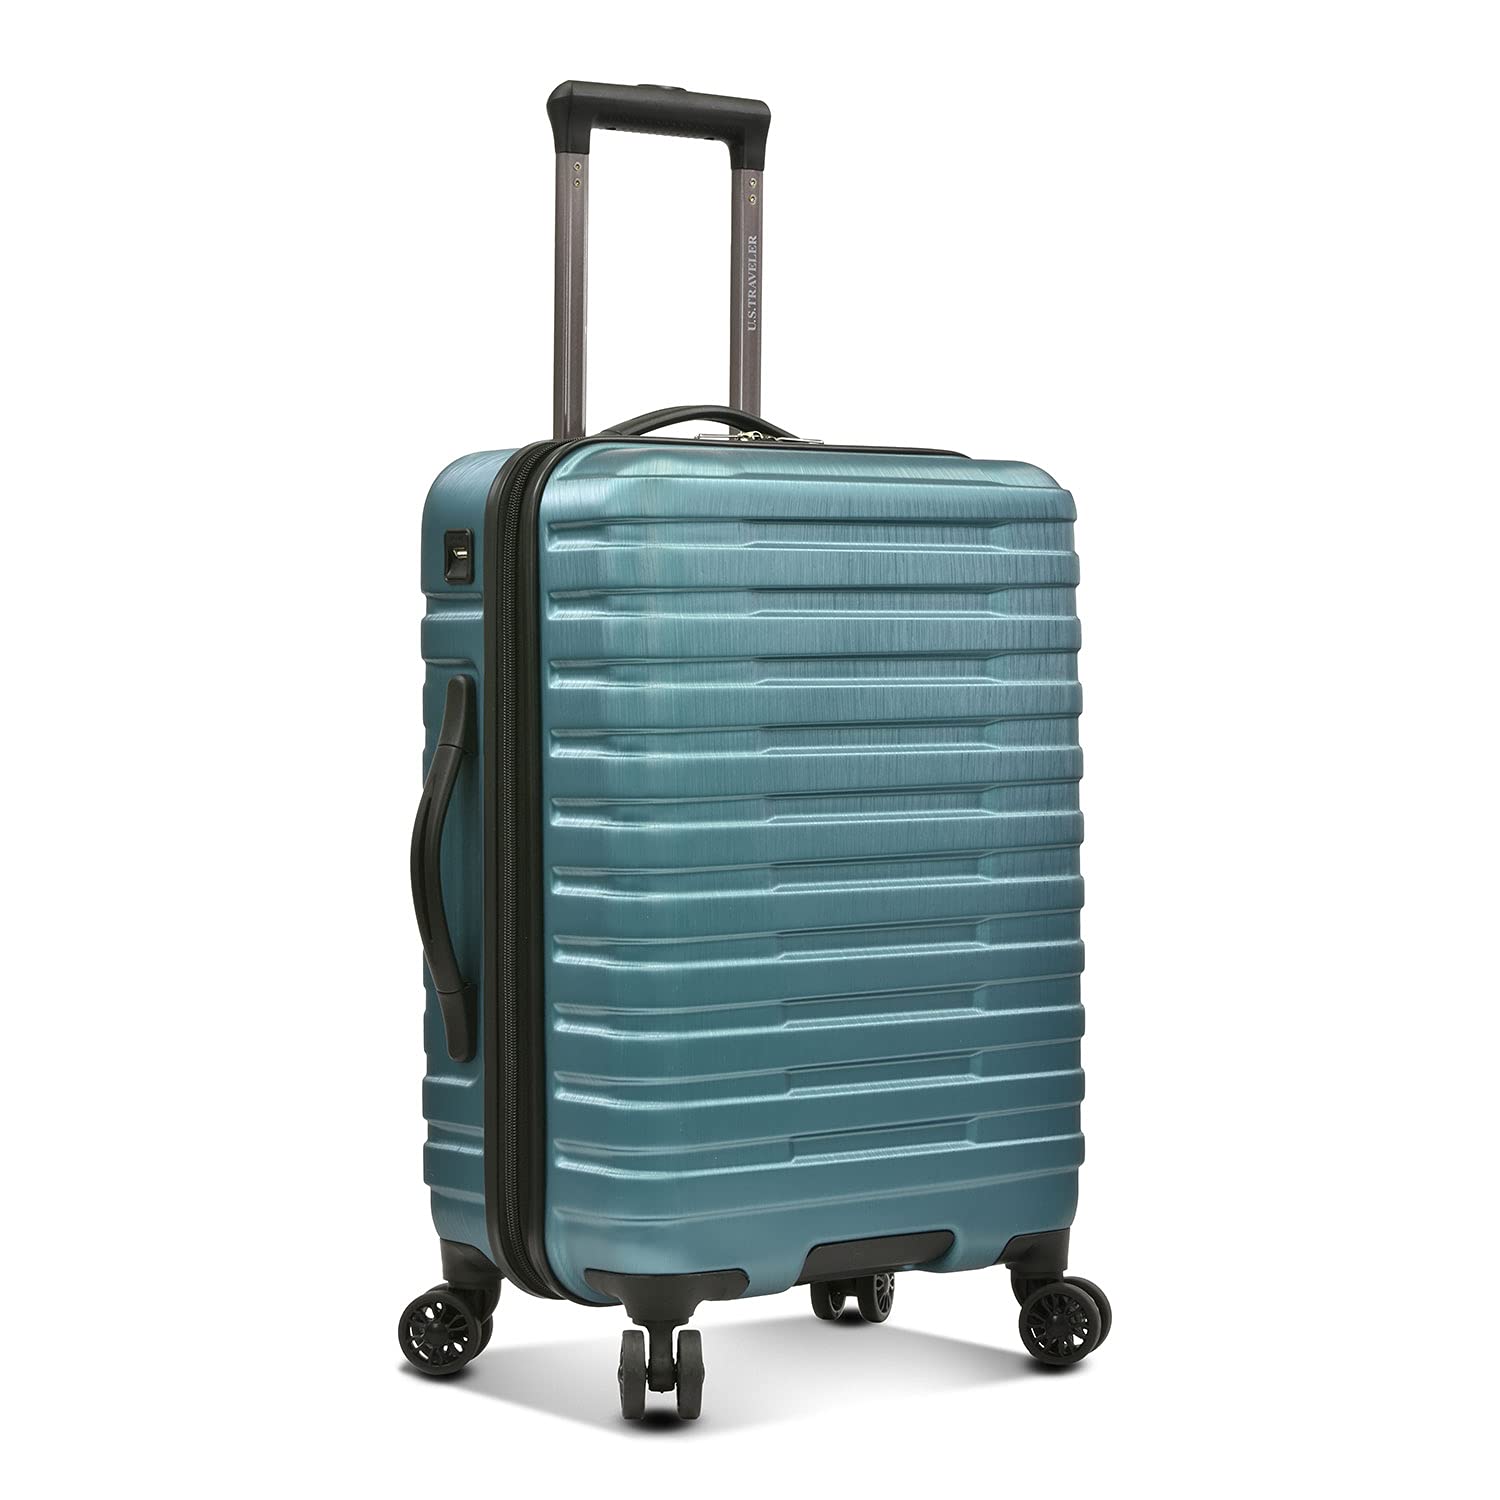 U.S. Traveler Boren Polycarbonate Hardside Rugged Travel Suitcase Luggage with 8 Spinner Wheels, Aluminum Handle, Teal, 2-Piece Set, USB Port in Carry-On